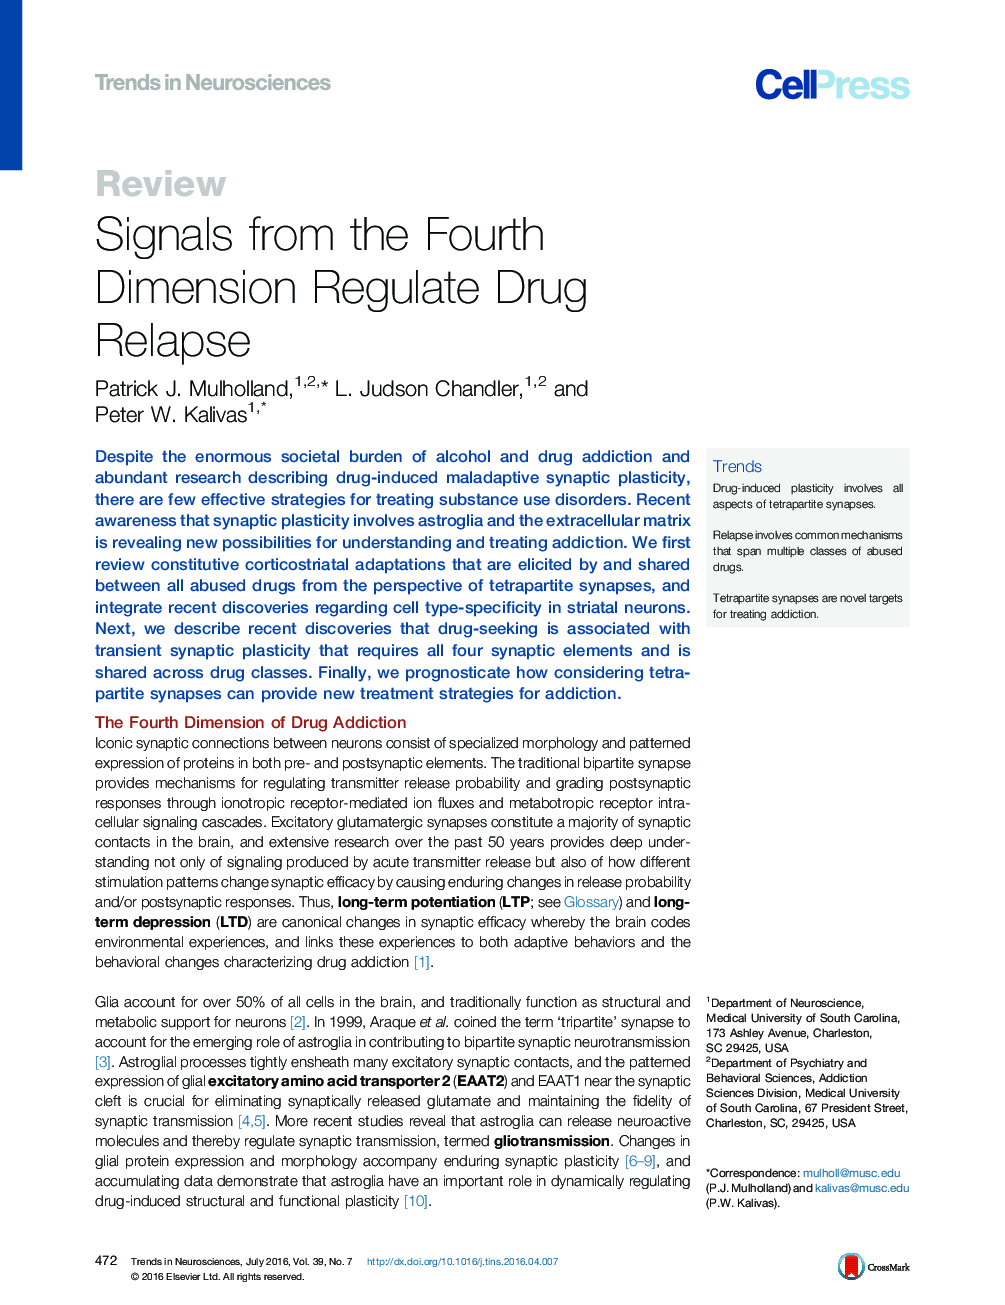 Signals from the Fourth Dimension Regulate Drug Relapse